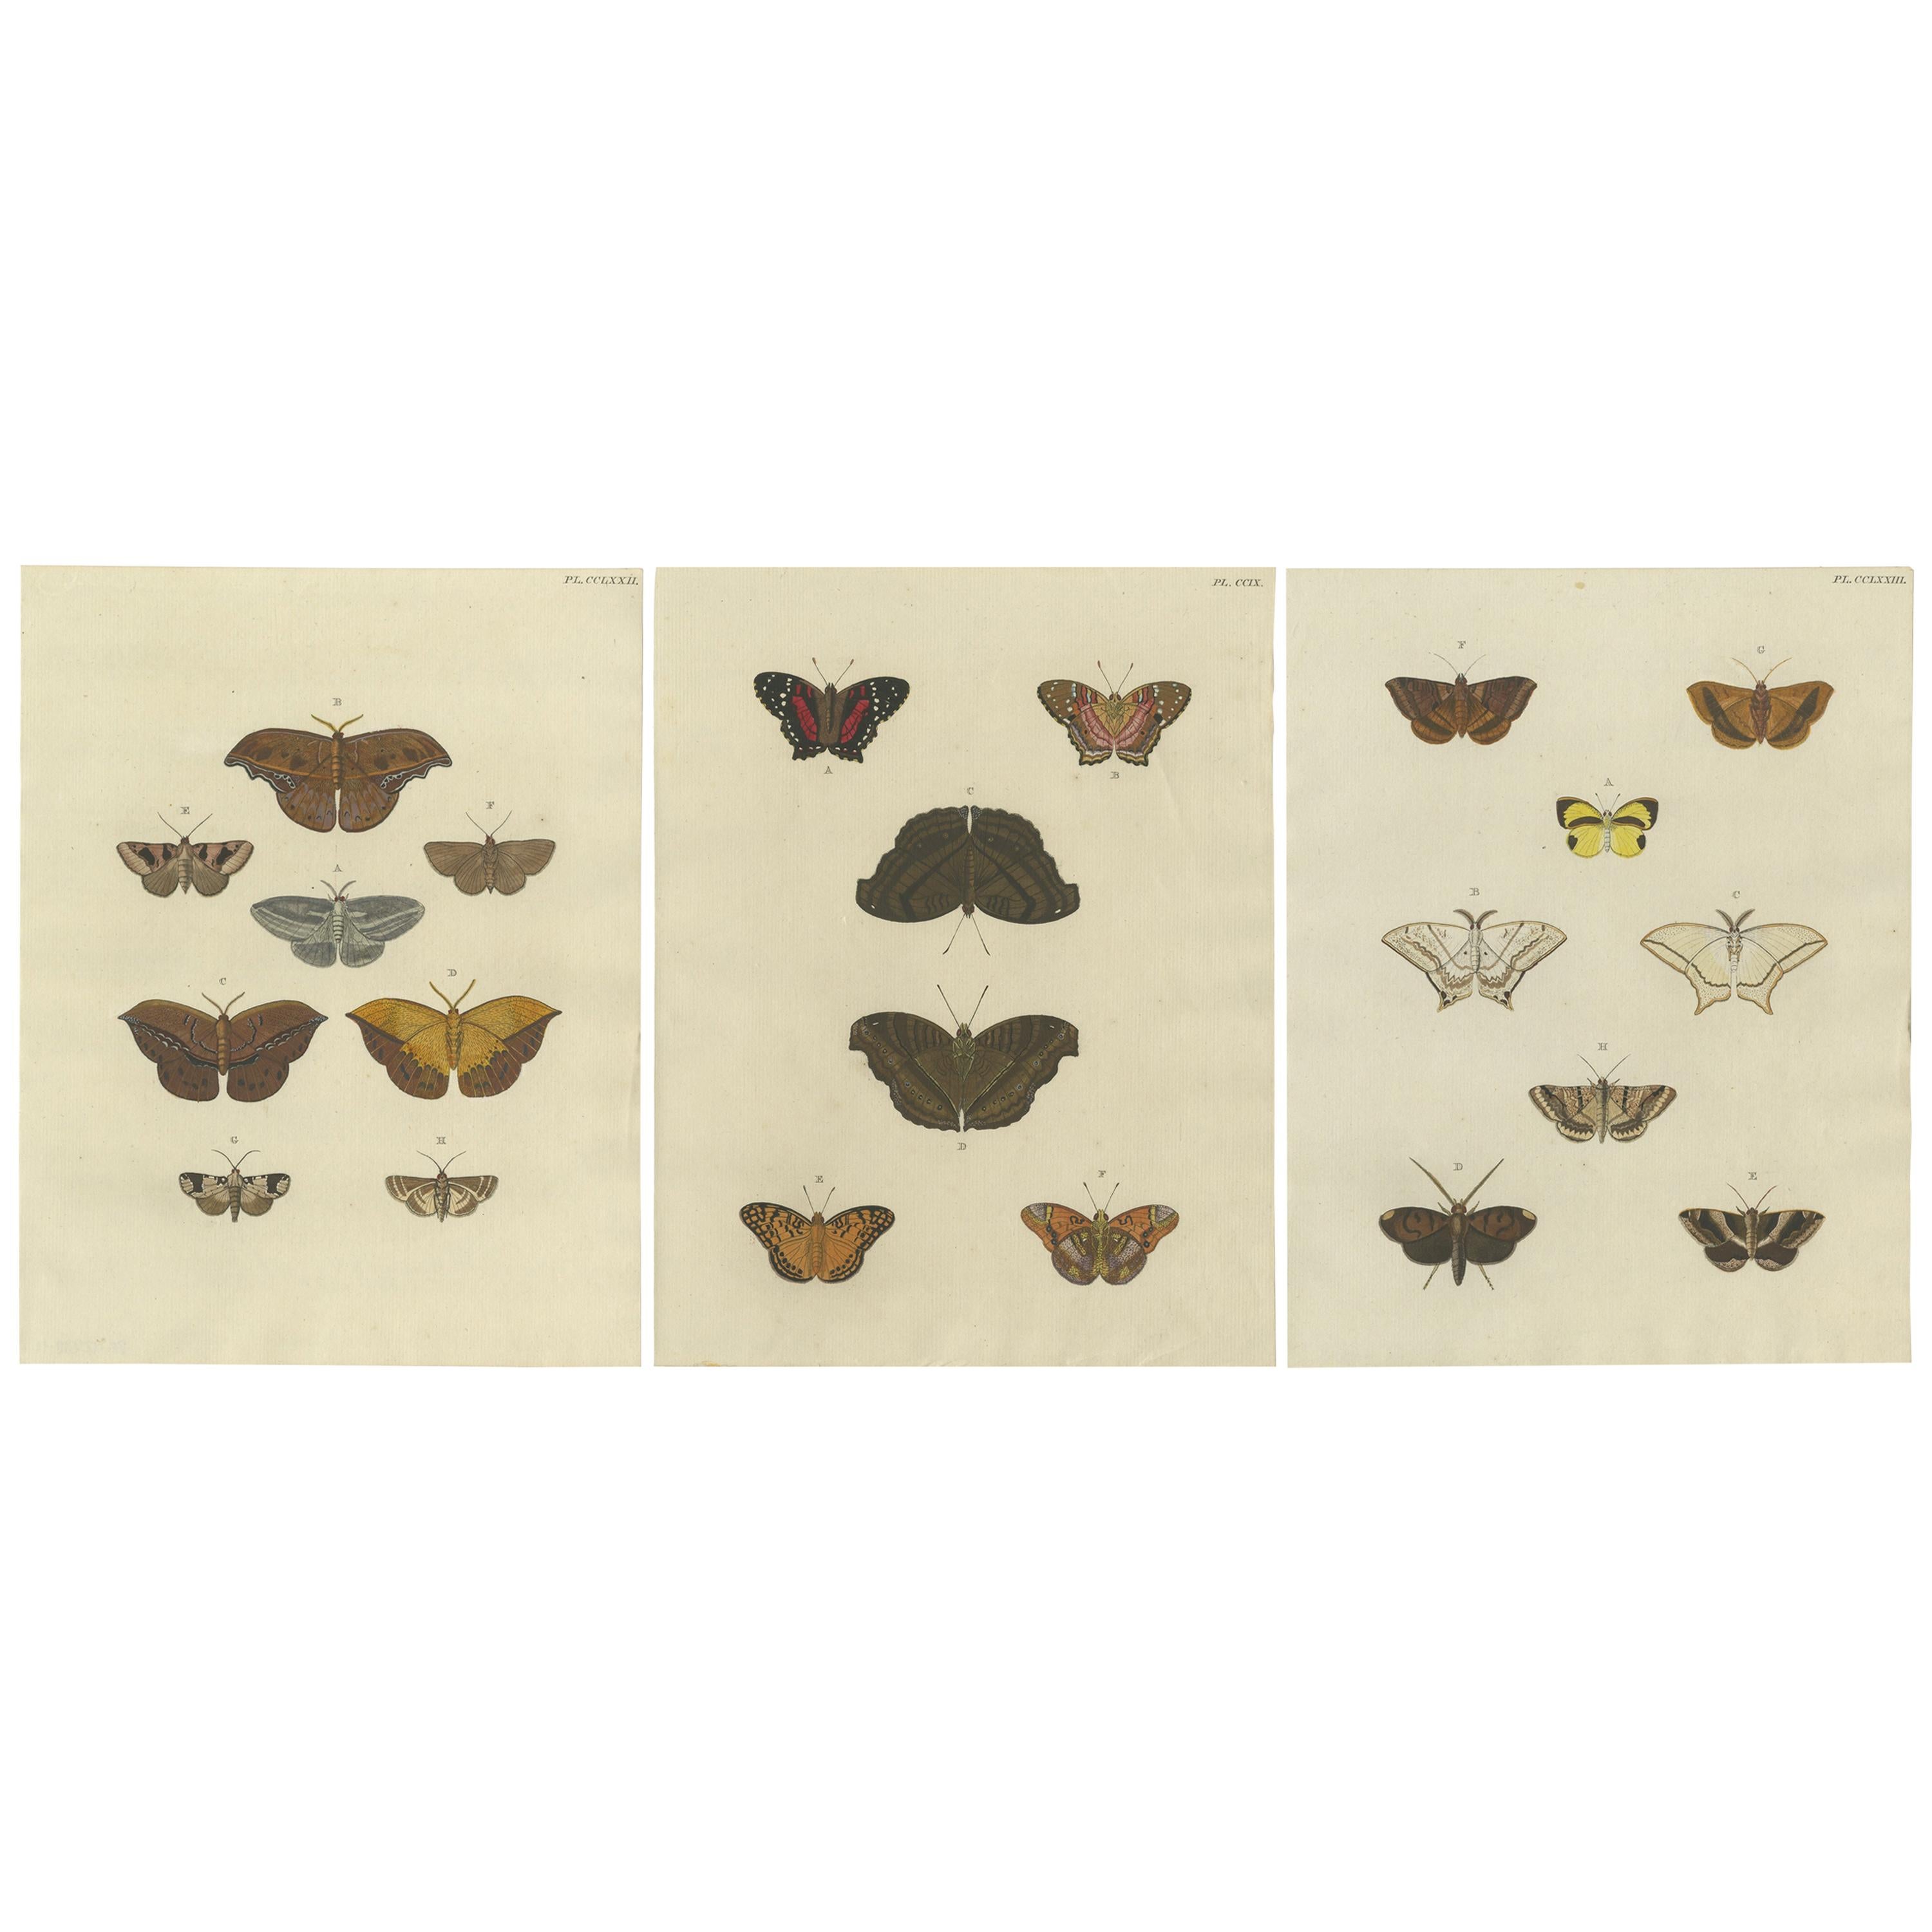 Set of 3 Antique Butterfly Prints 'Pl. 260' by Cramer, '1779'